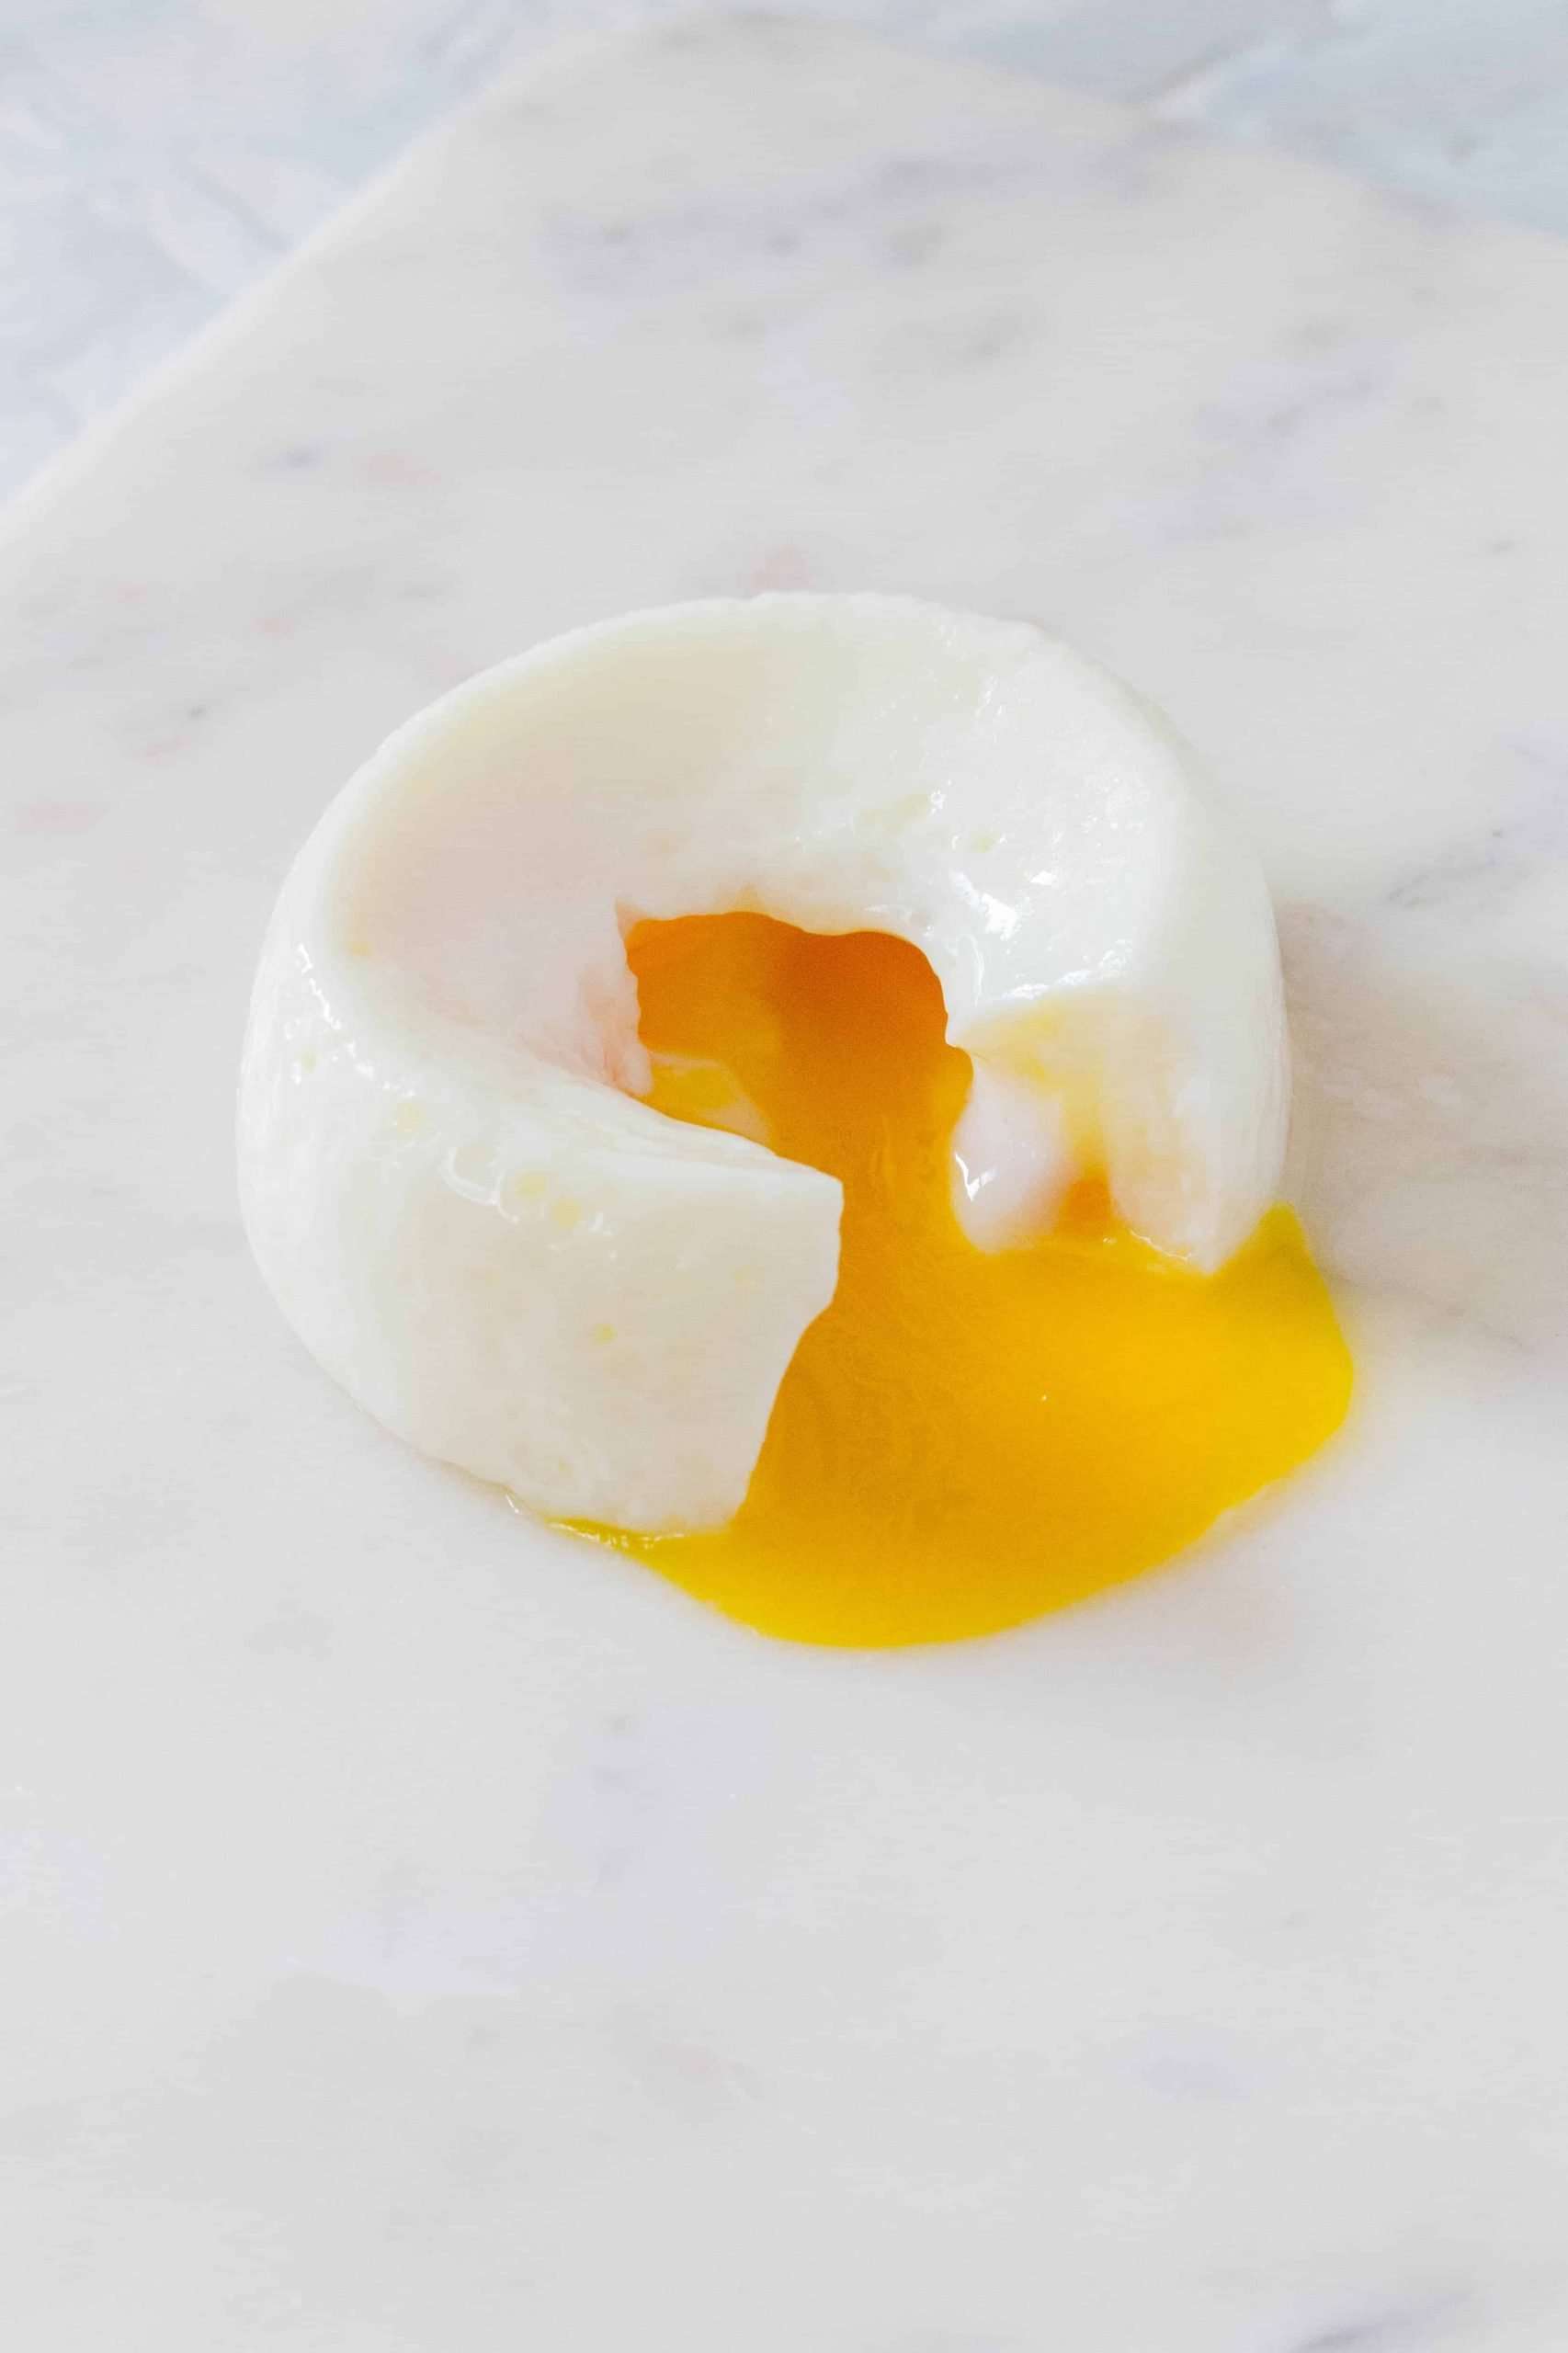 How To Make Instant Pot Poached Eggs